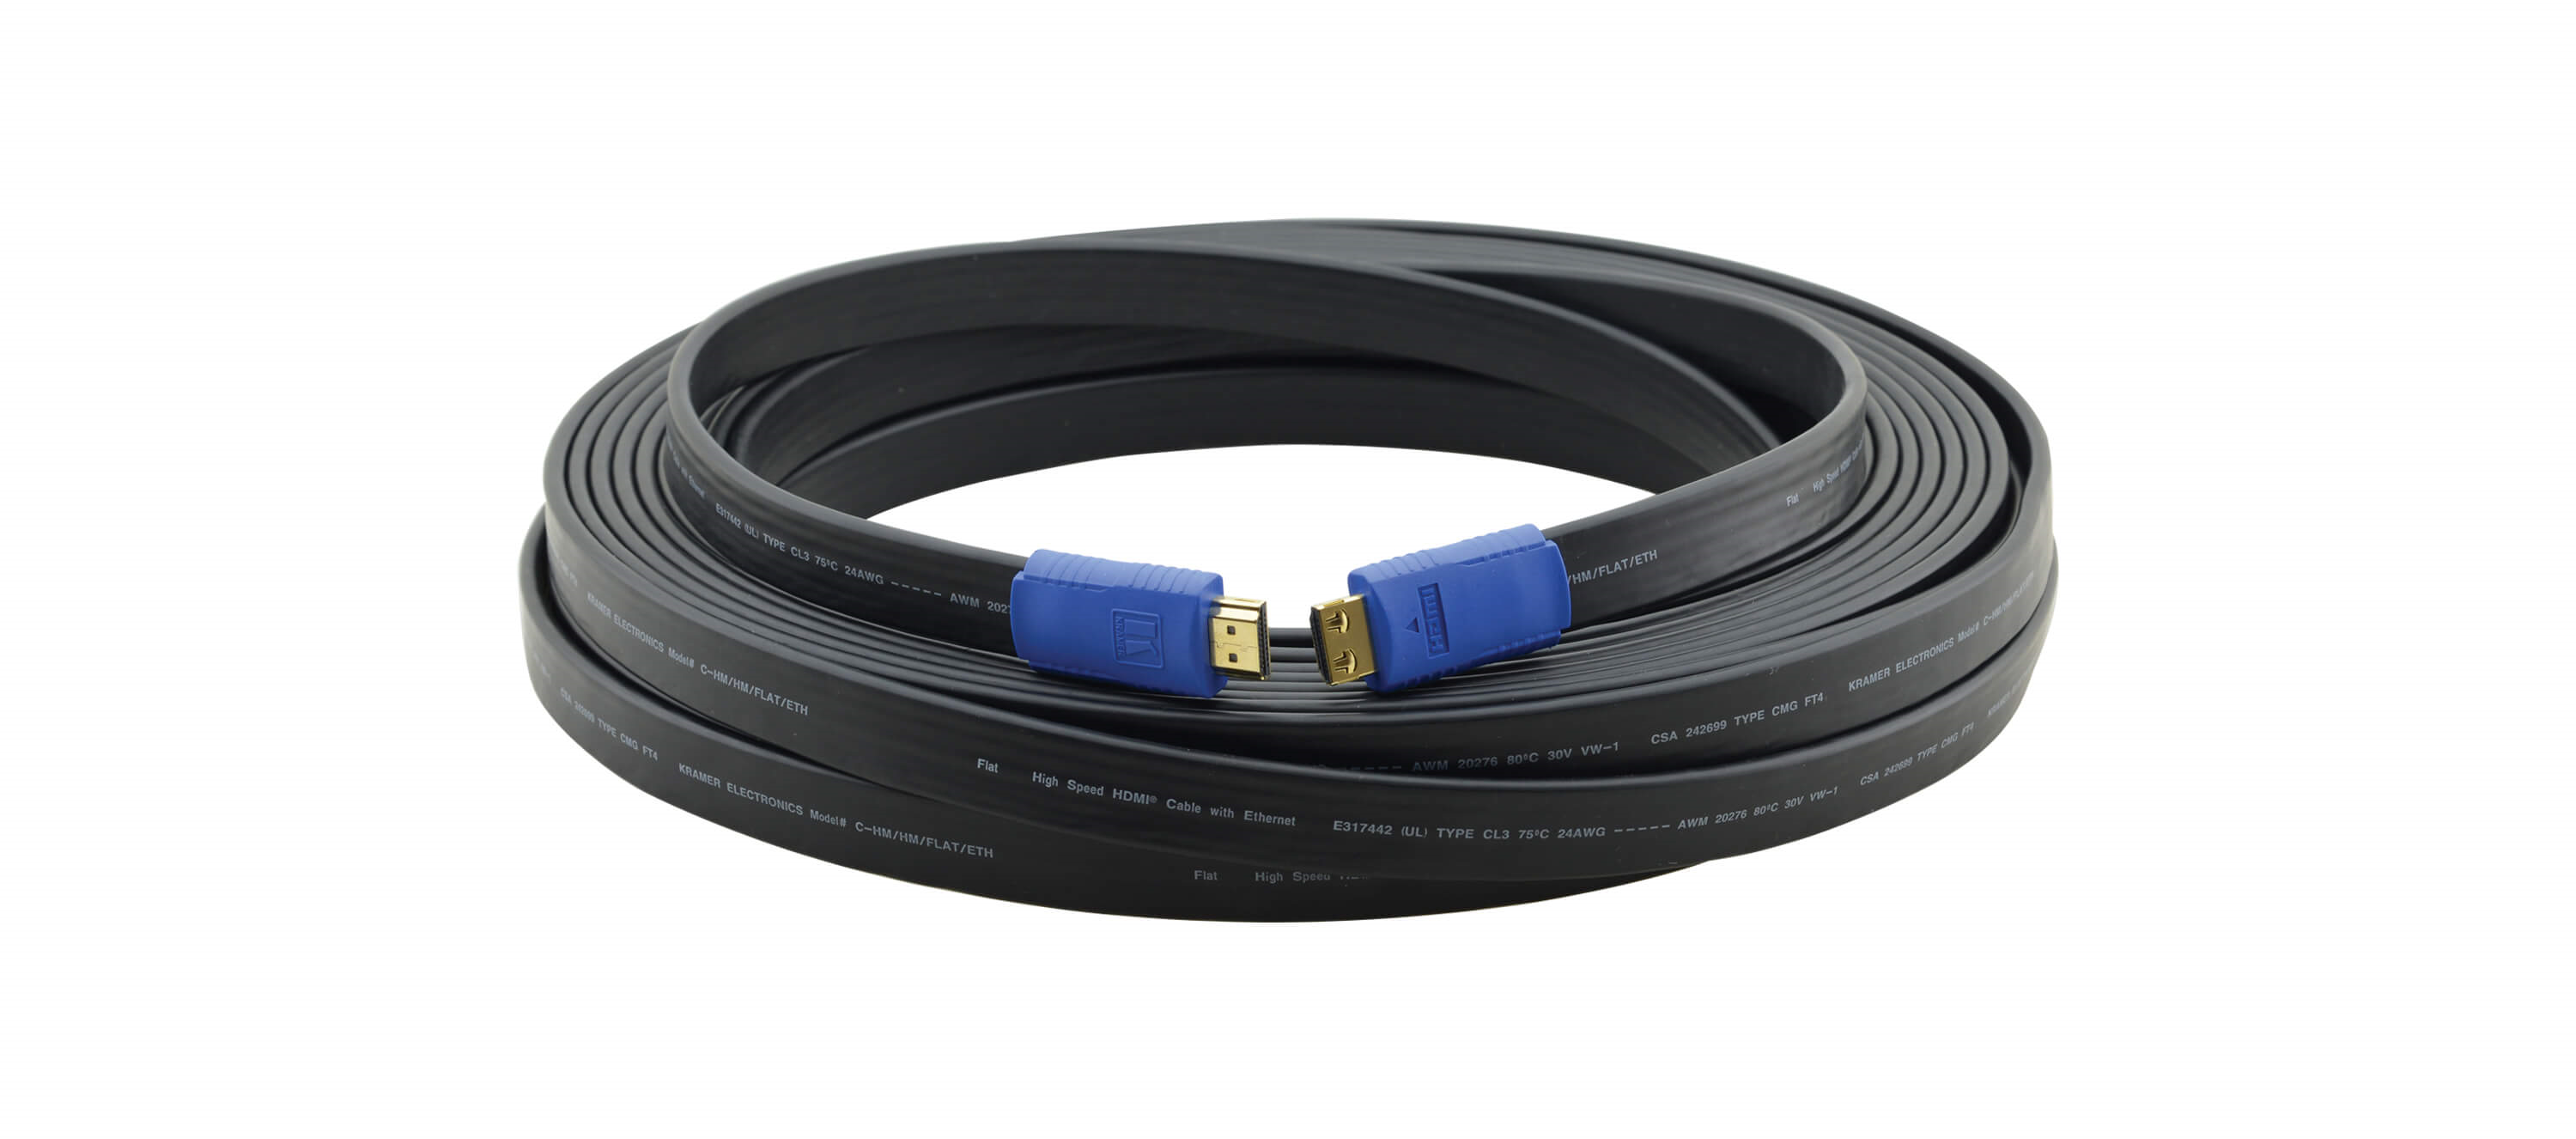 C-HM/HM/FLAT/ETH-6 Flat High–Speed HDMI Cable with Ethernet - 6'